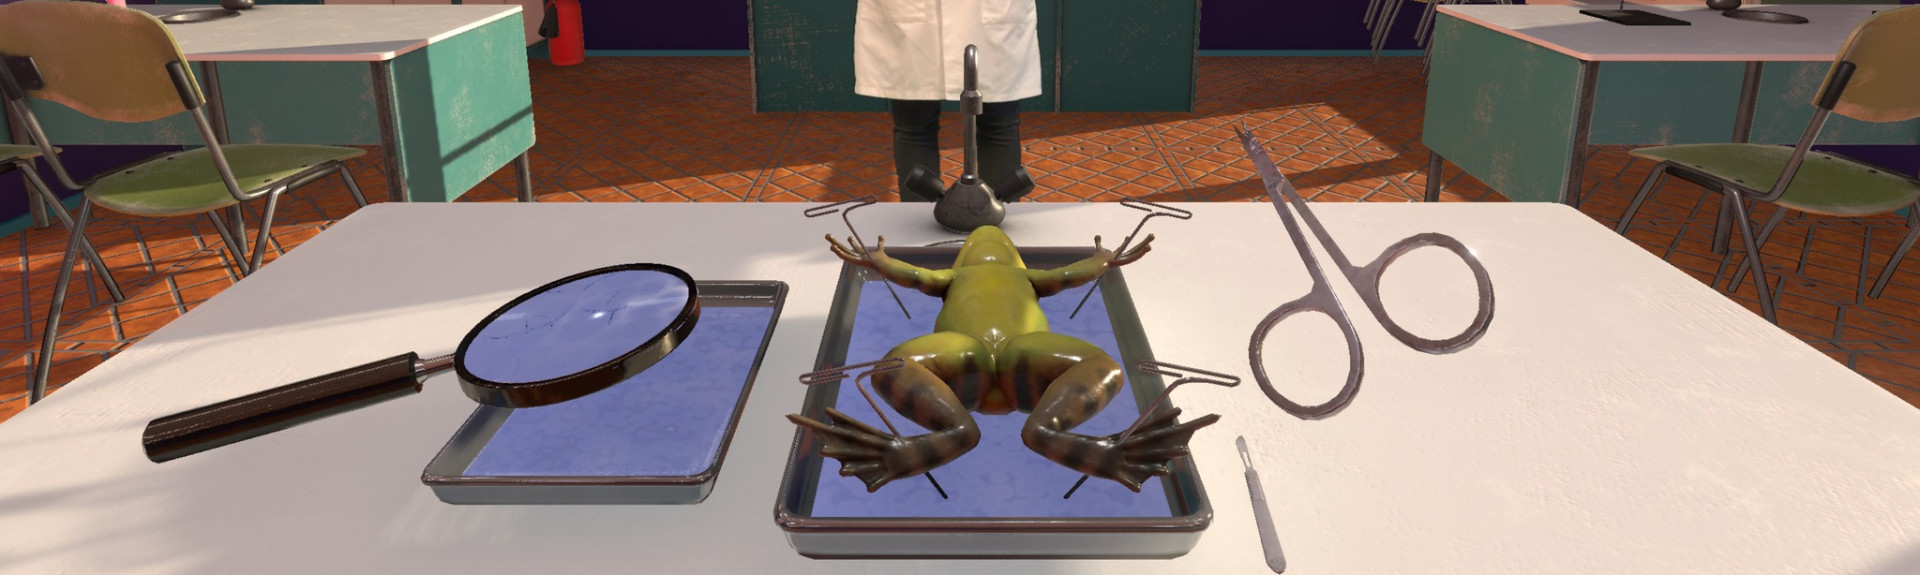 Dissection Simulator: Frog Edition